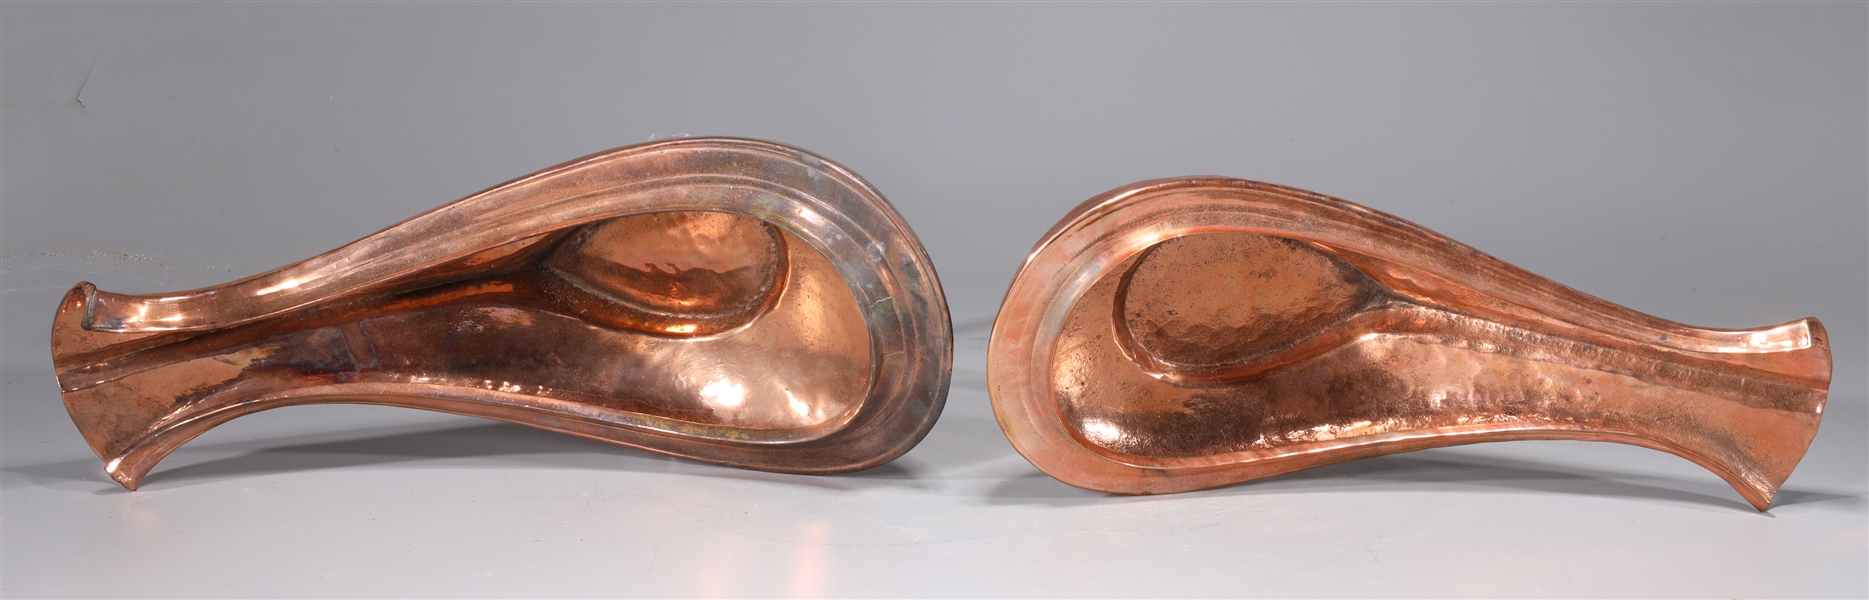 A pair of Yondi Hindi copper water 2ac5af